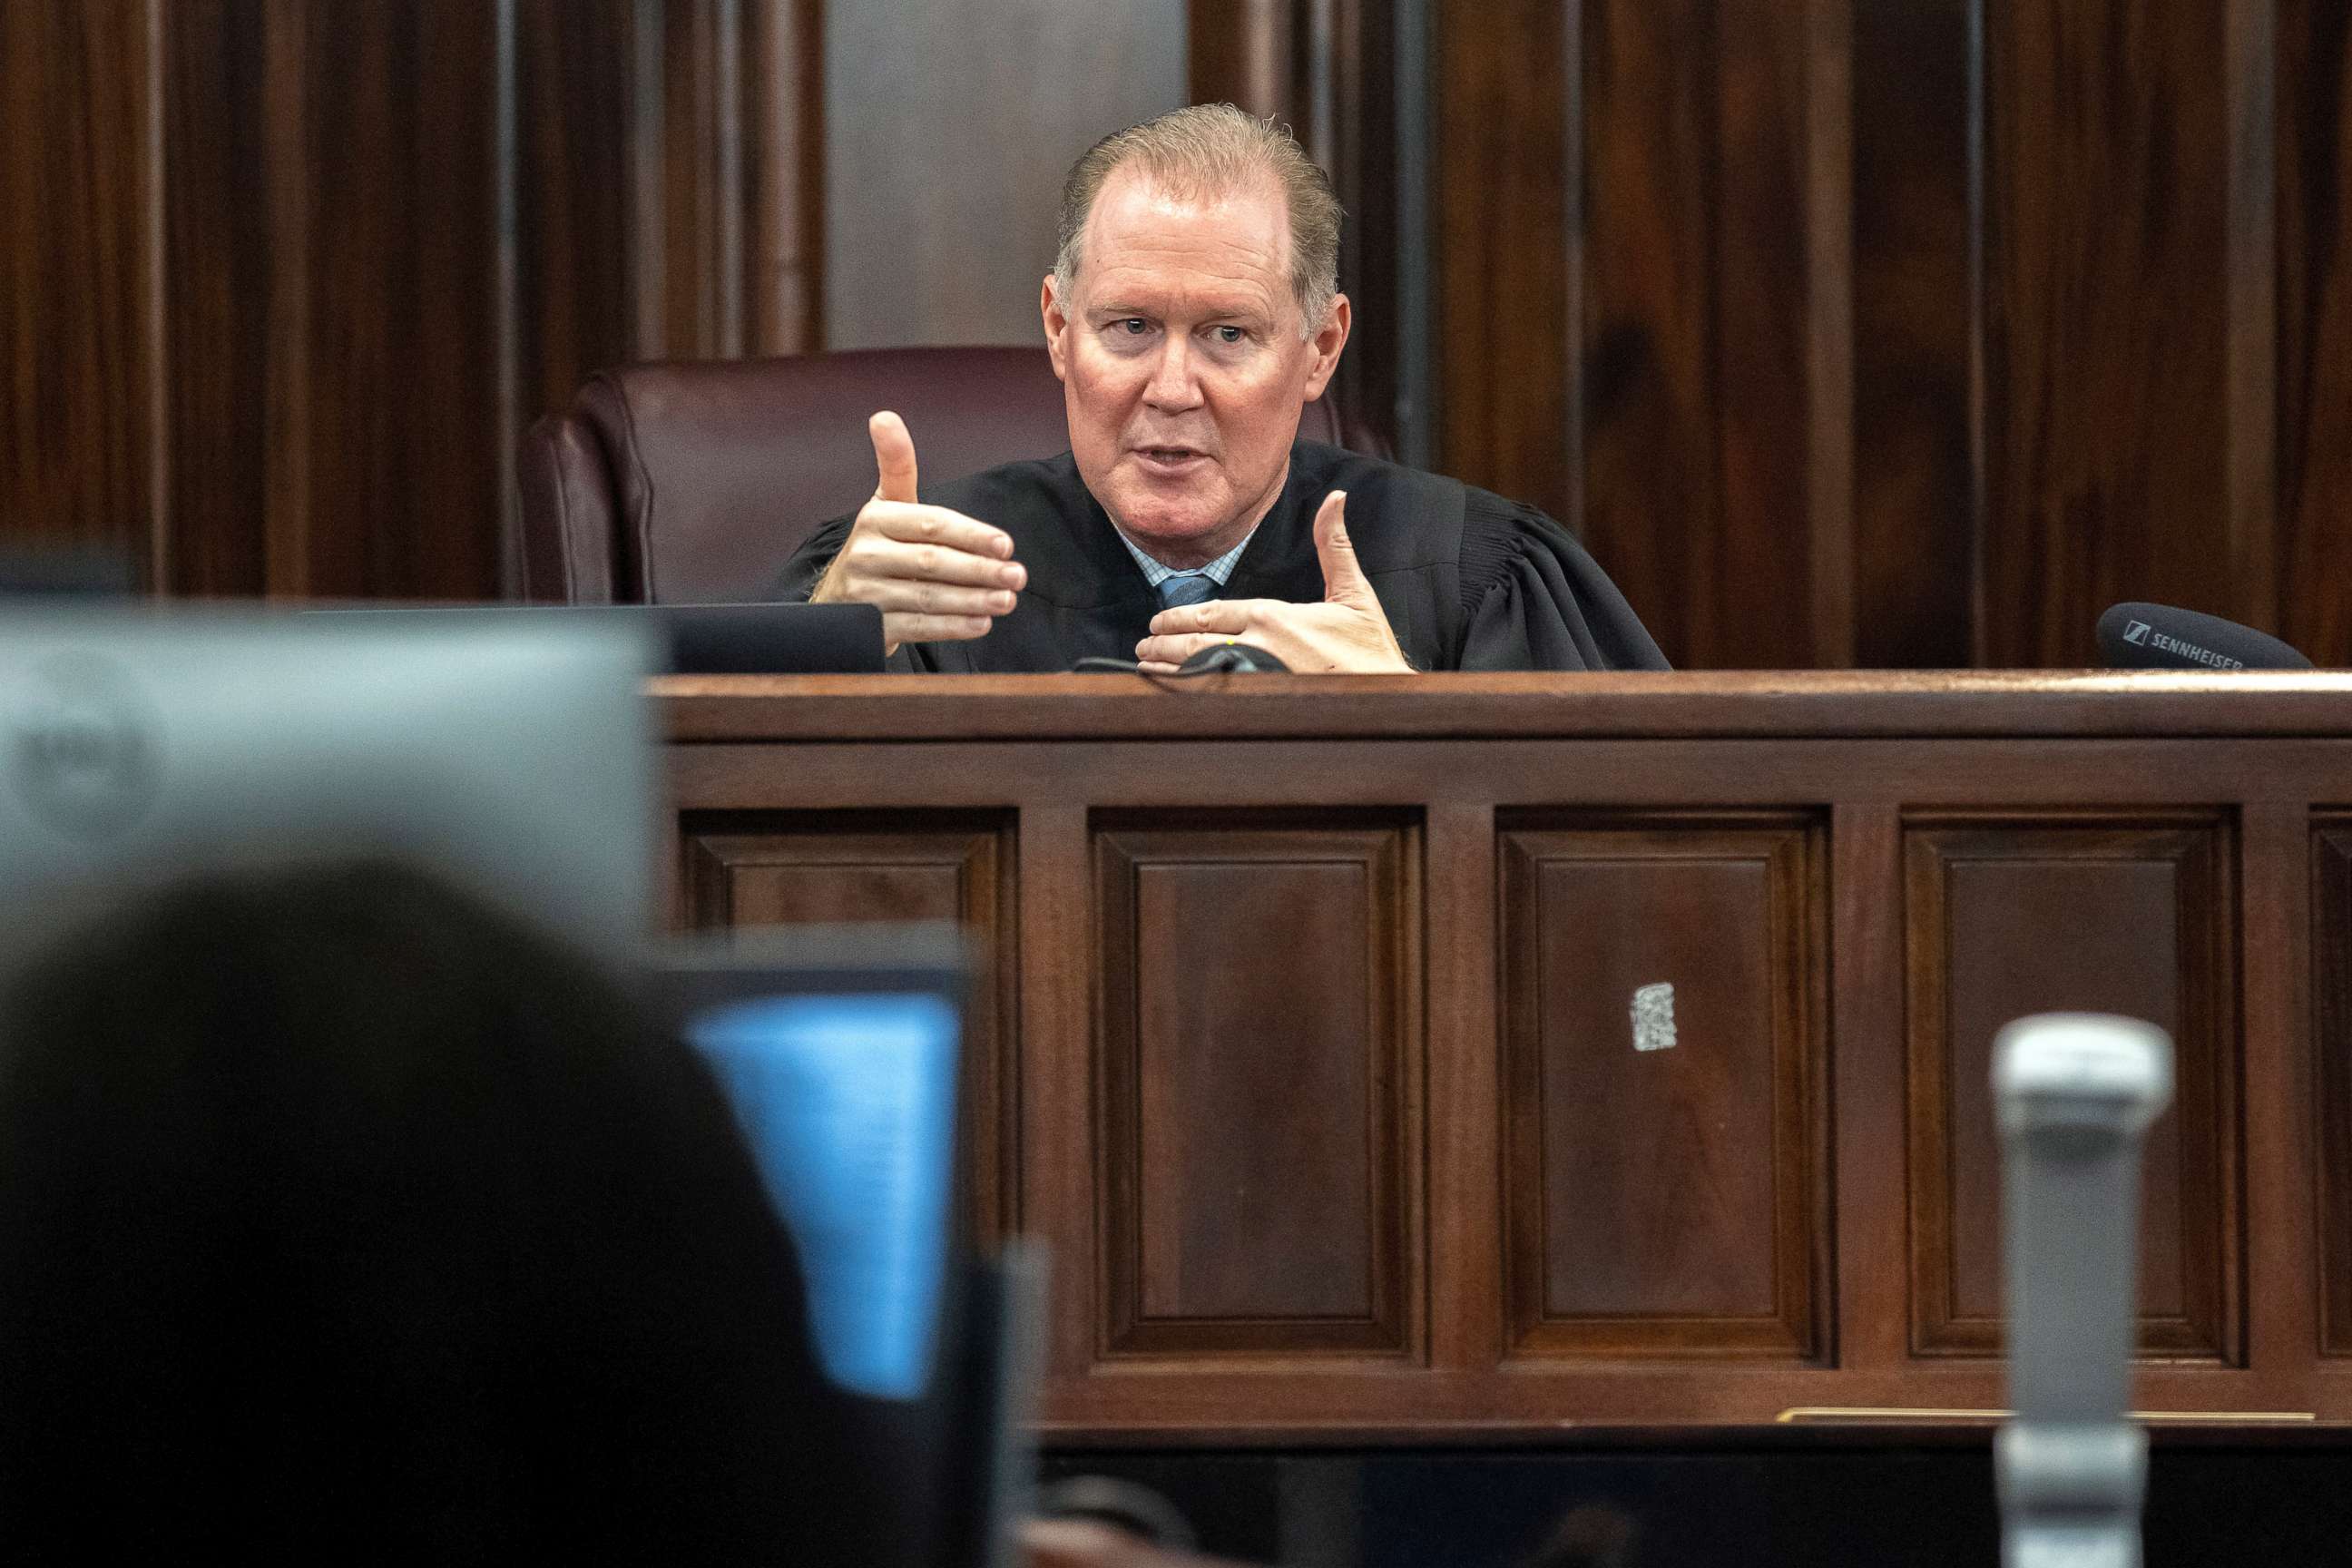 PHOTO: Superior Court Judge Timothy Walmsley speaks during the trial of the men charged with killing Ahmaud Arbery, in the Glynn County Courthouse, Nov. 9, 2021, in Brunswick, Ga.